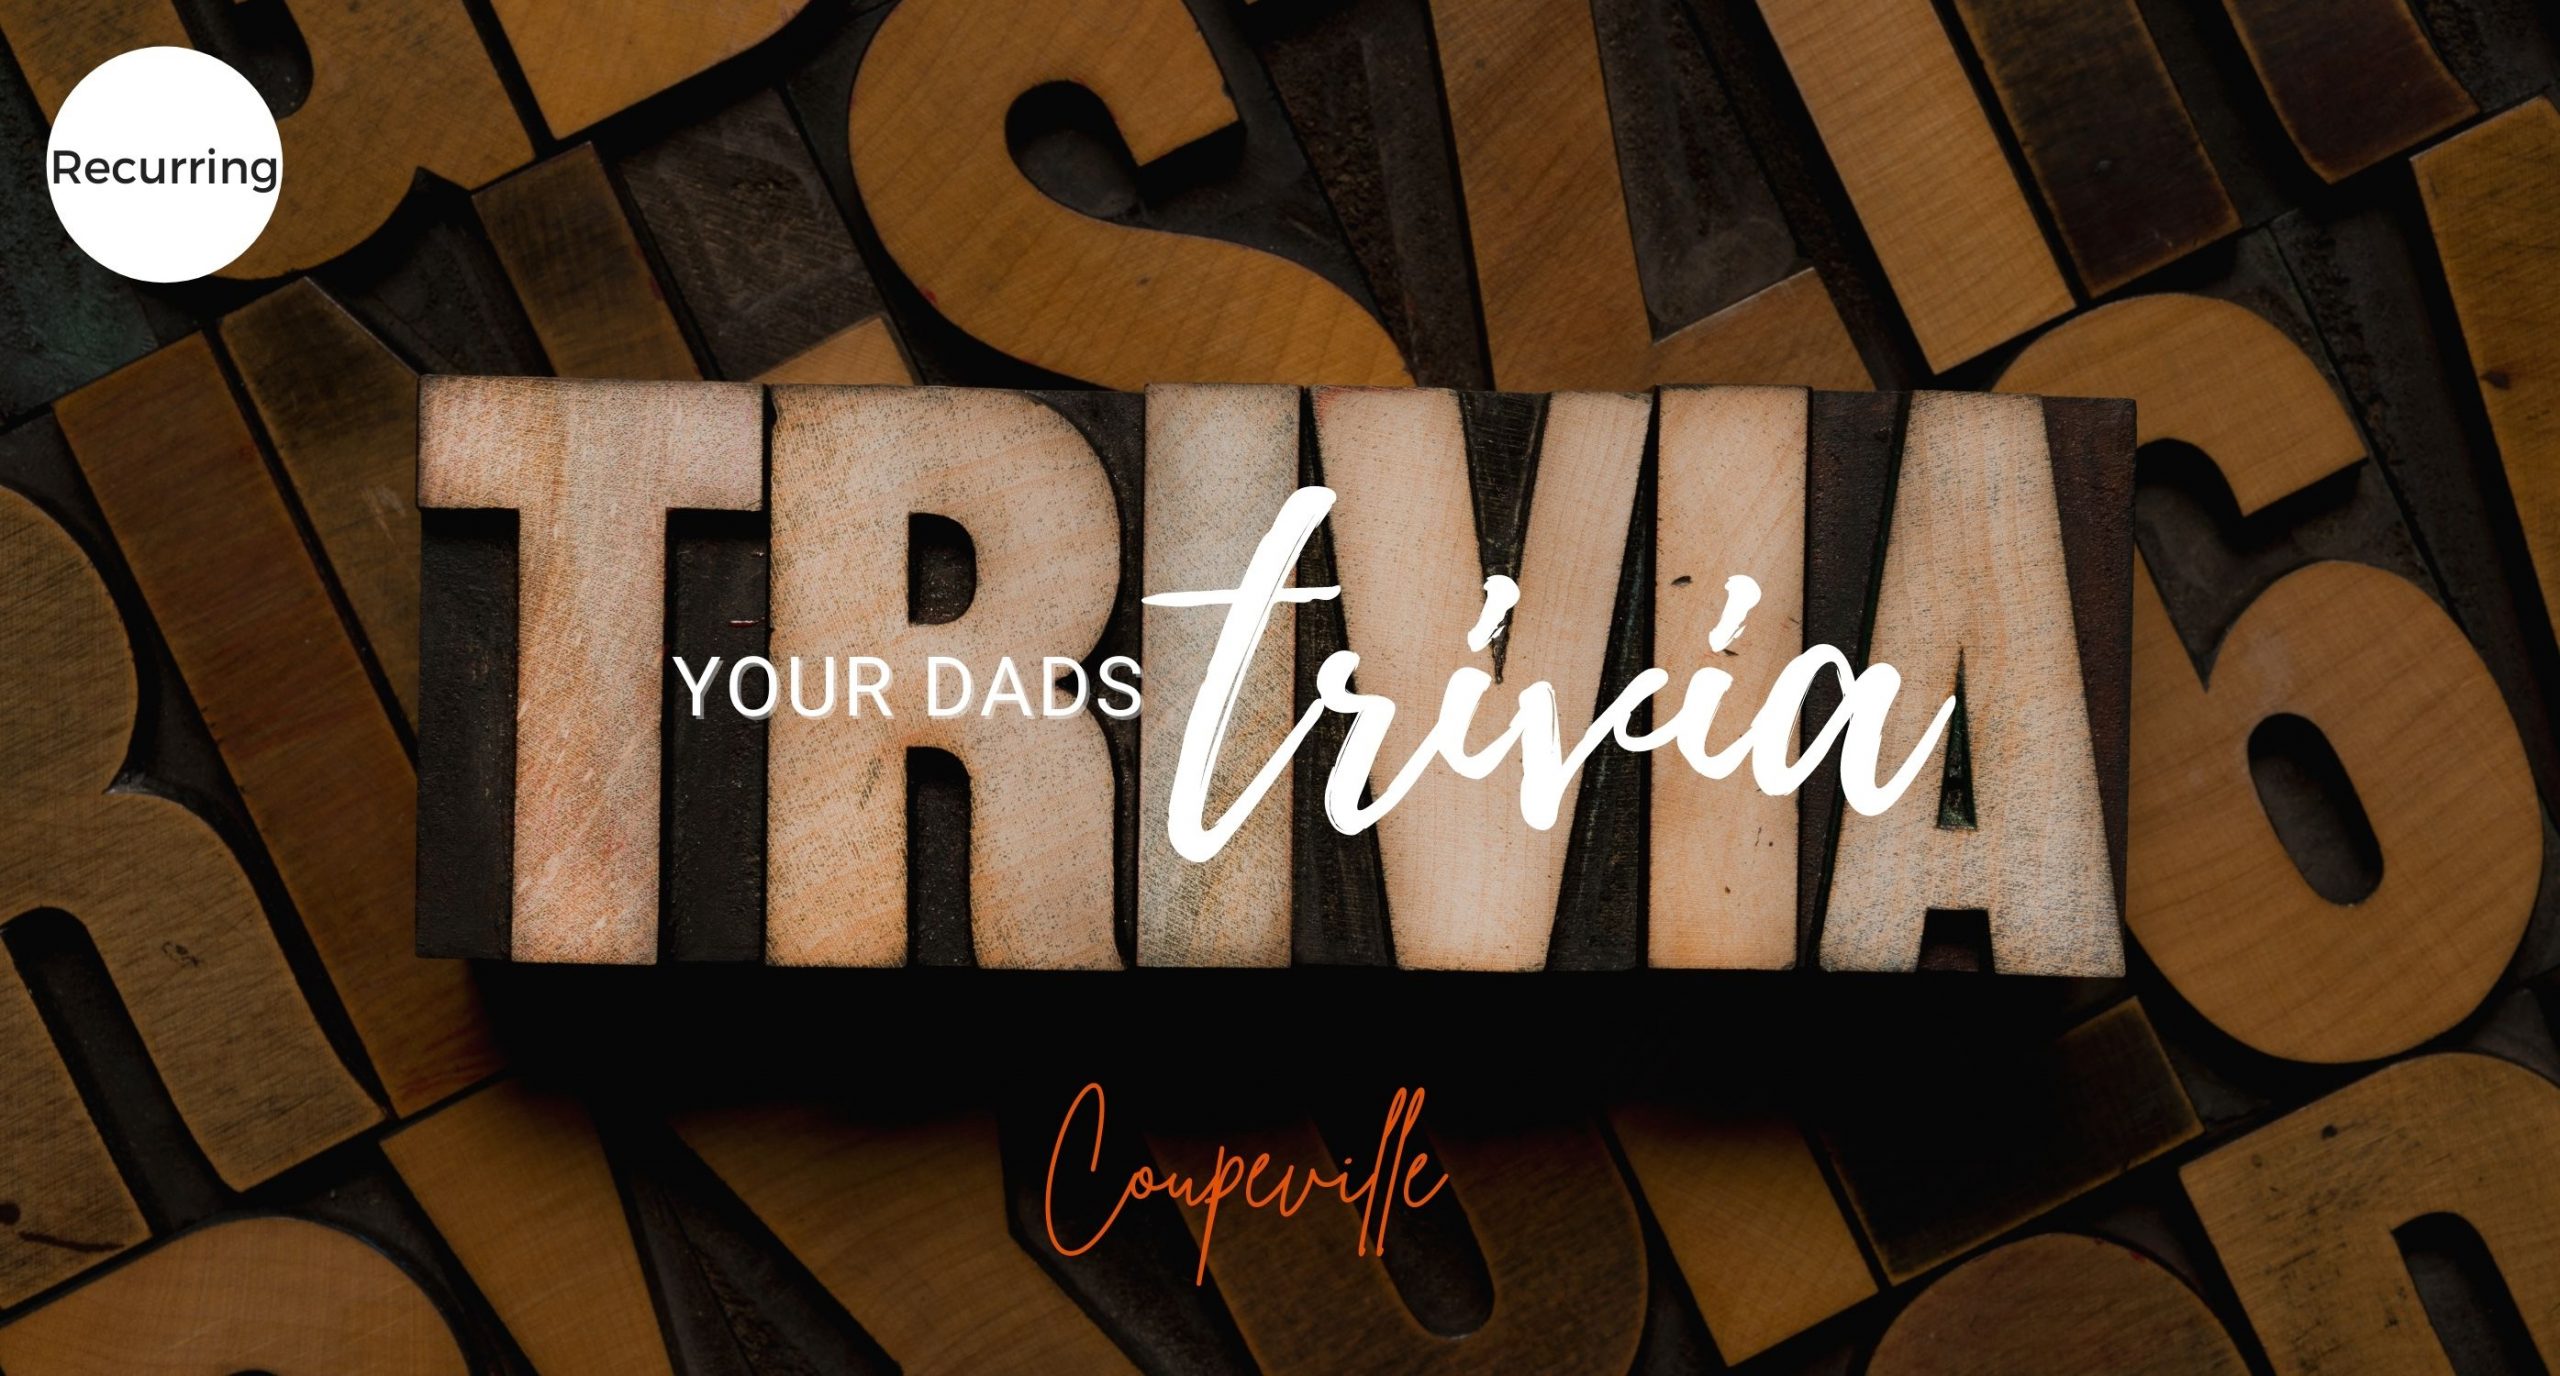 Your Dads Trivia, Penn Cove Taproom, Trivia night, fun on Whidbey Island, Night Life